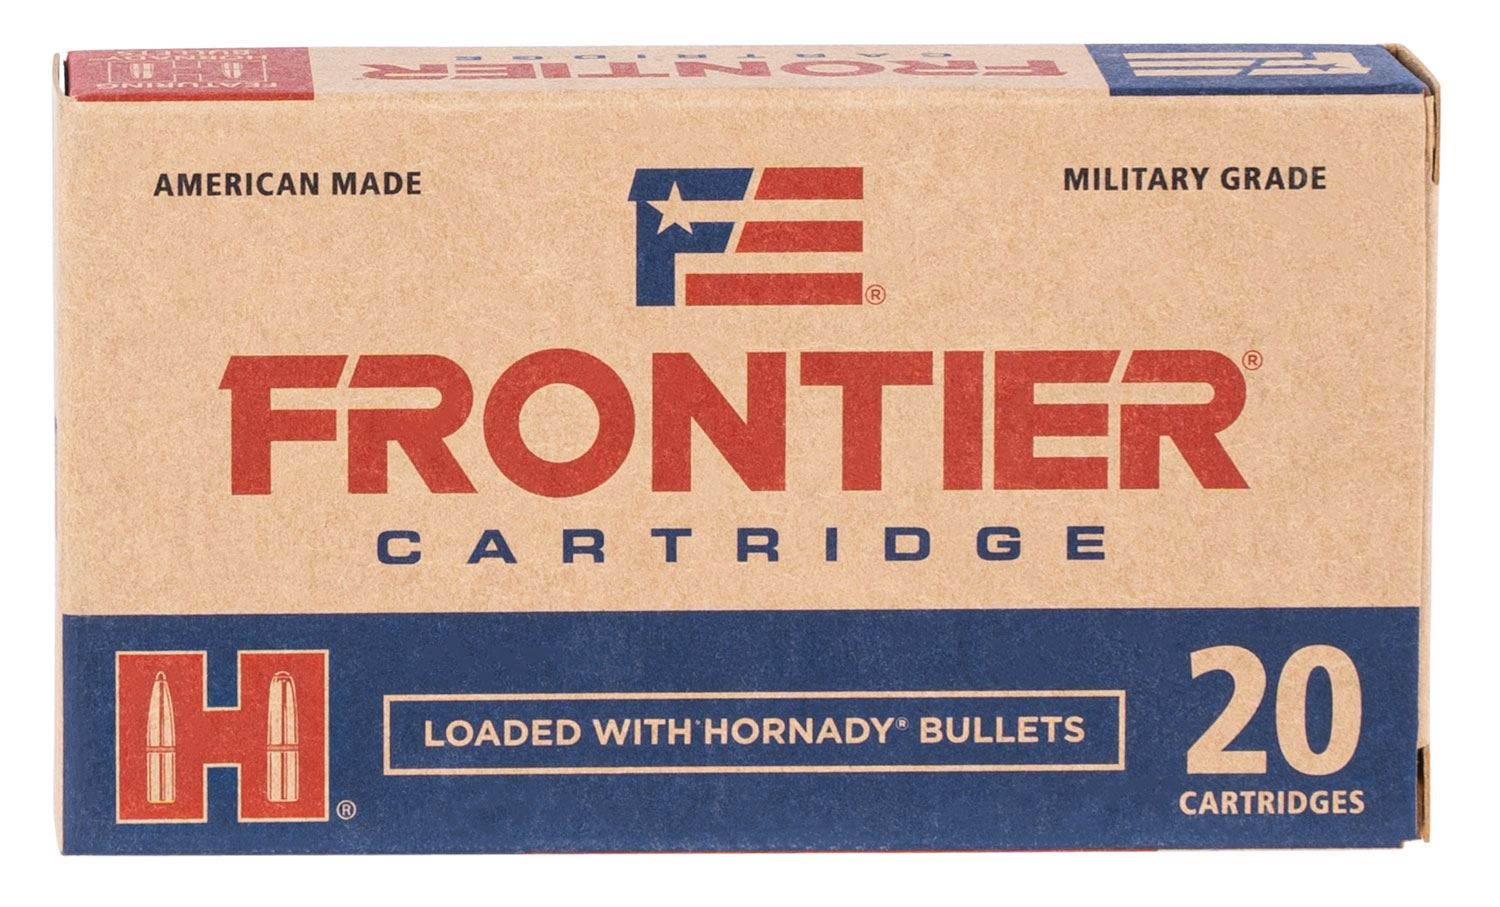 Frontier FR310 Rifle Ammo 5.56 Nato 68 Gr Boattail Hollow Point Match